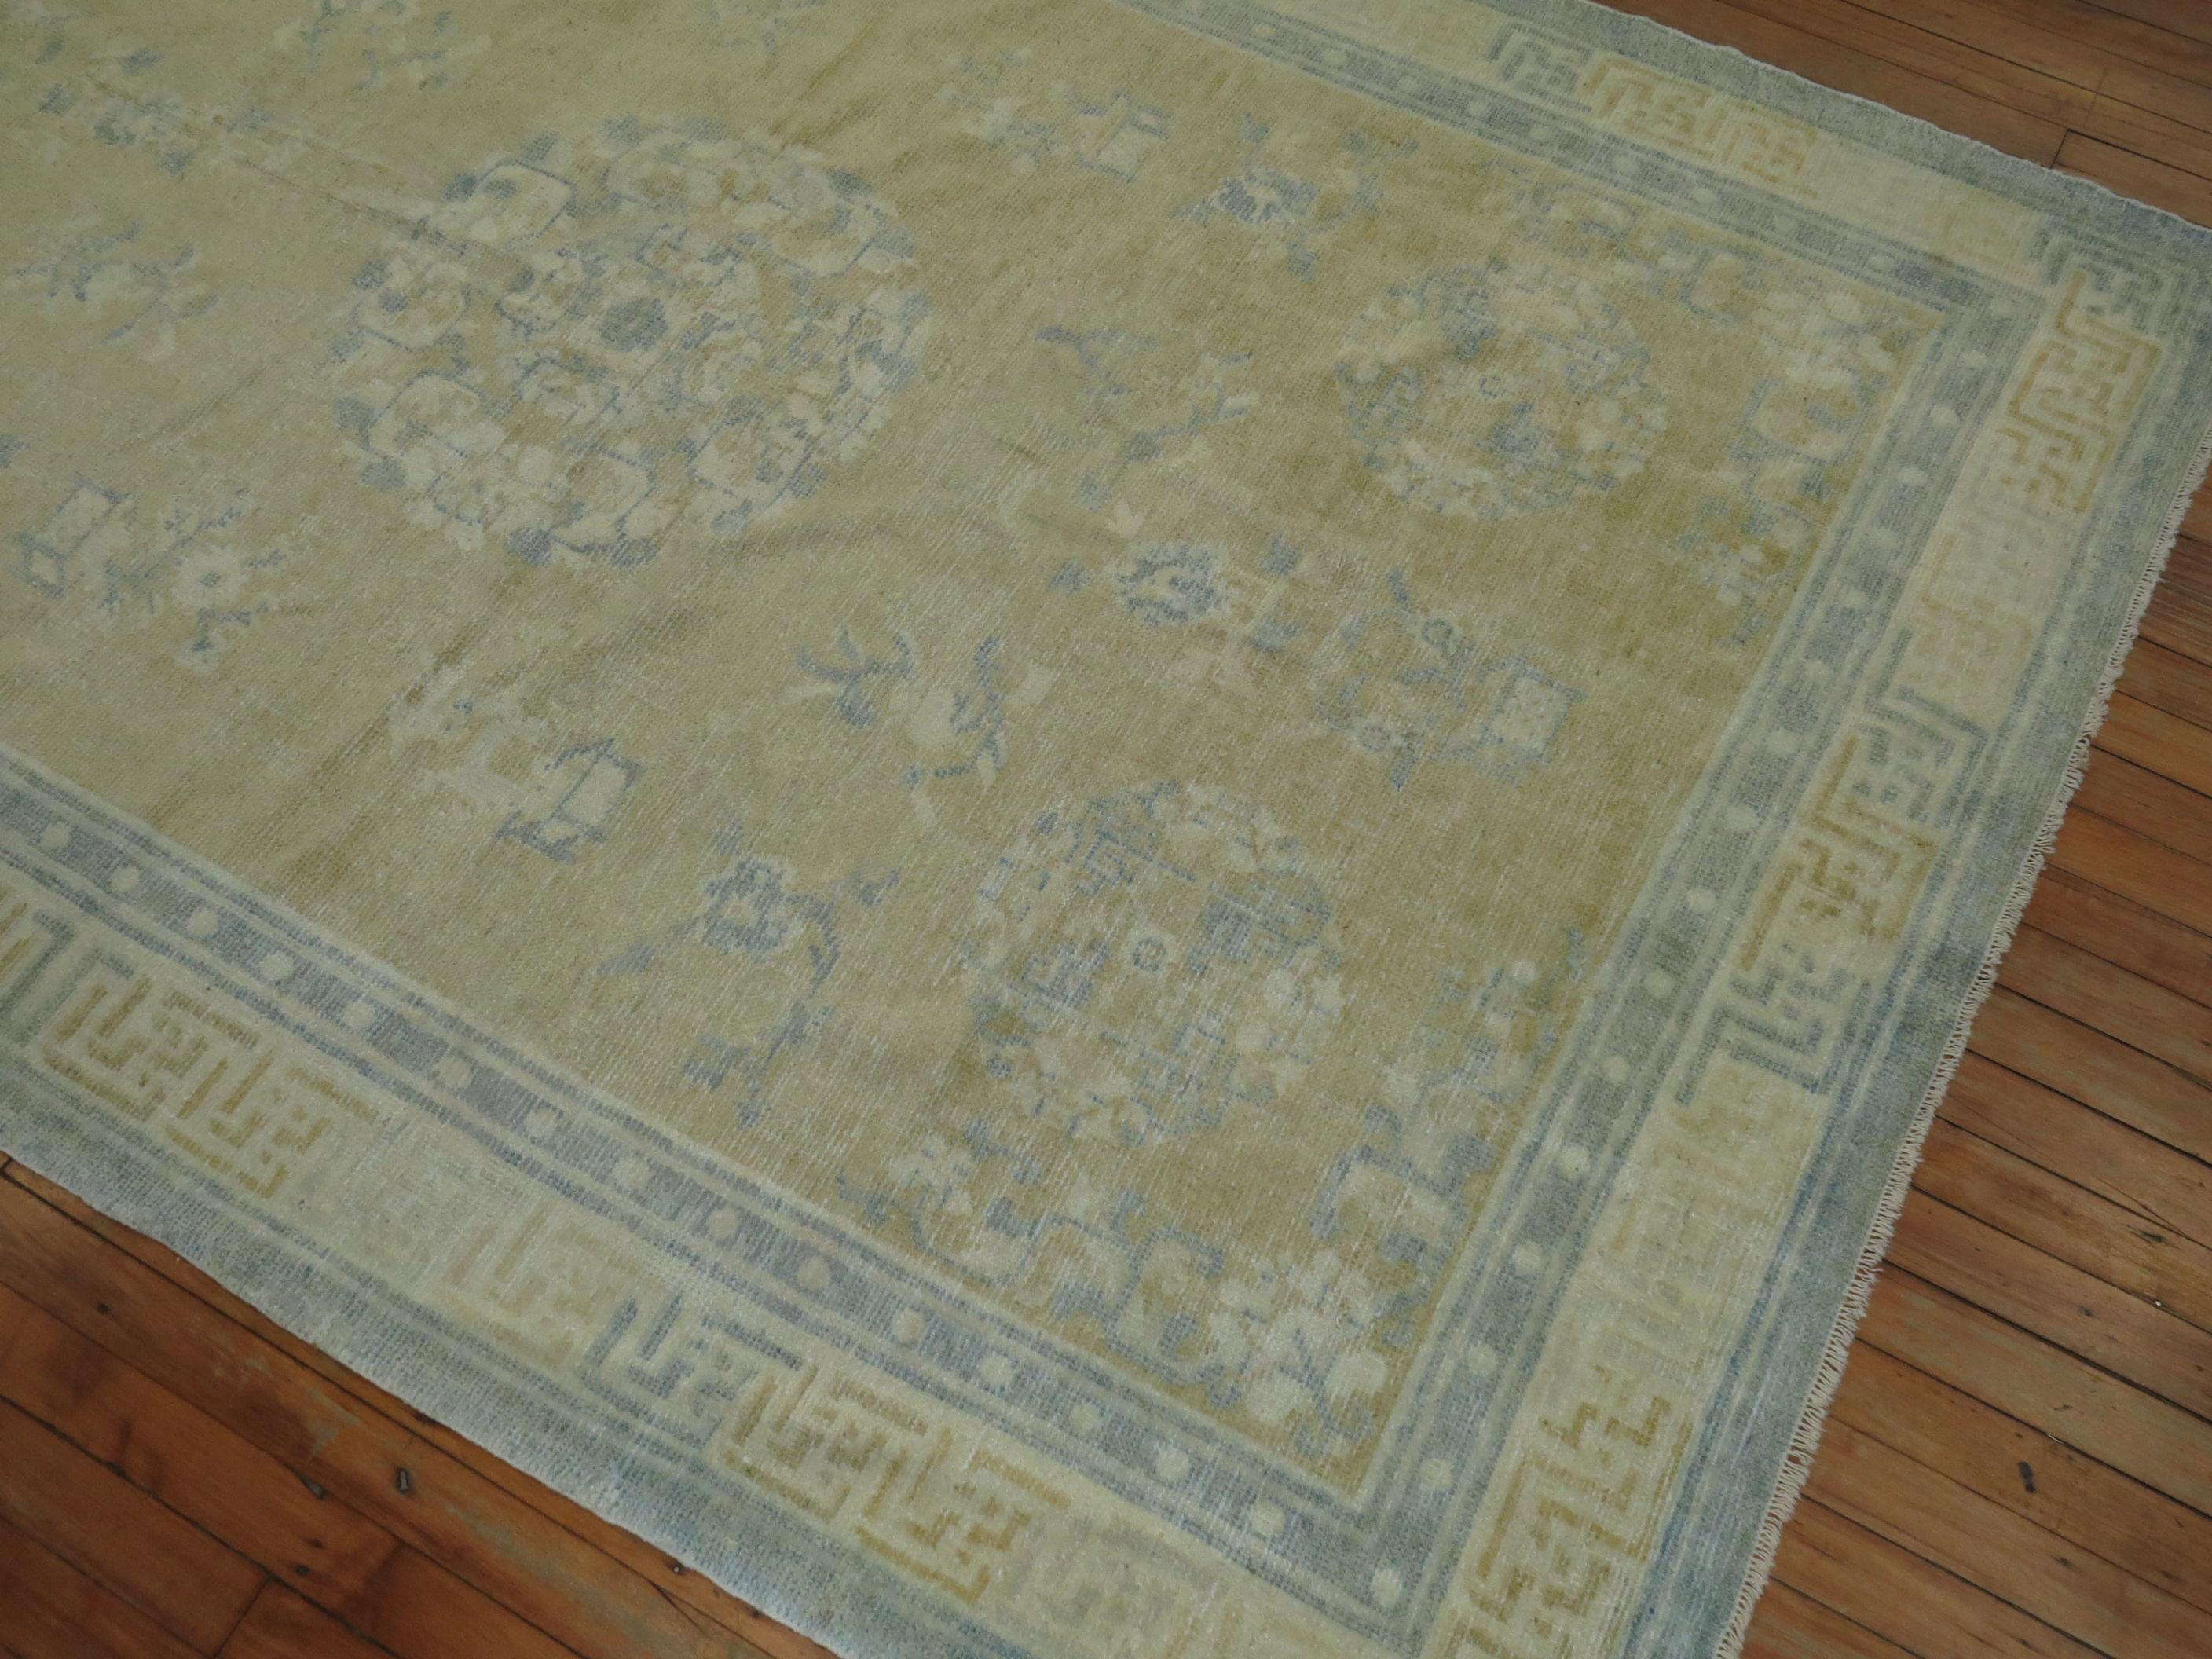 An intermediate size Chinese Peking rug in soft blue and champagne tones from the early 20th century

5'3'' x  8'1''